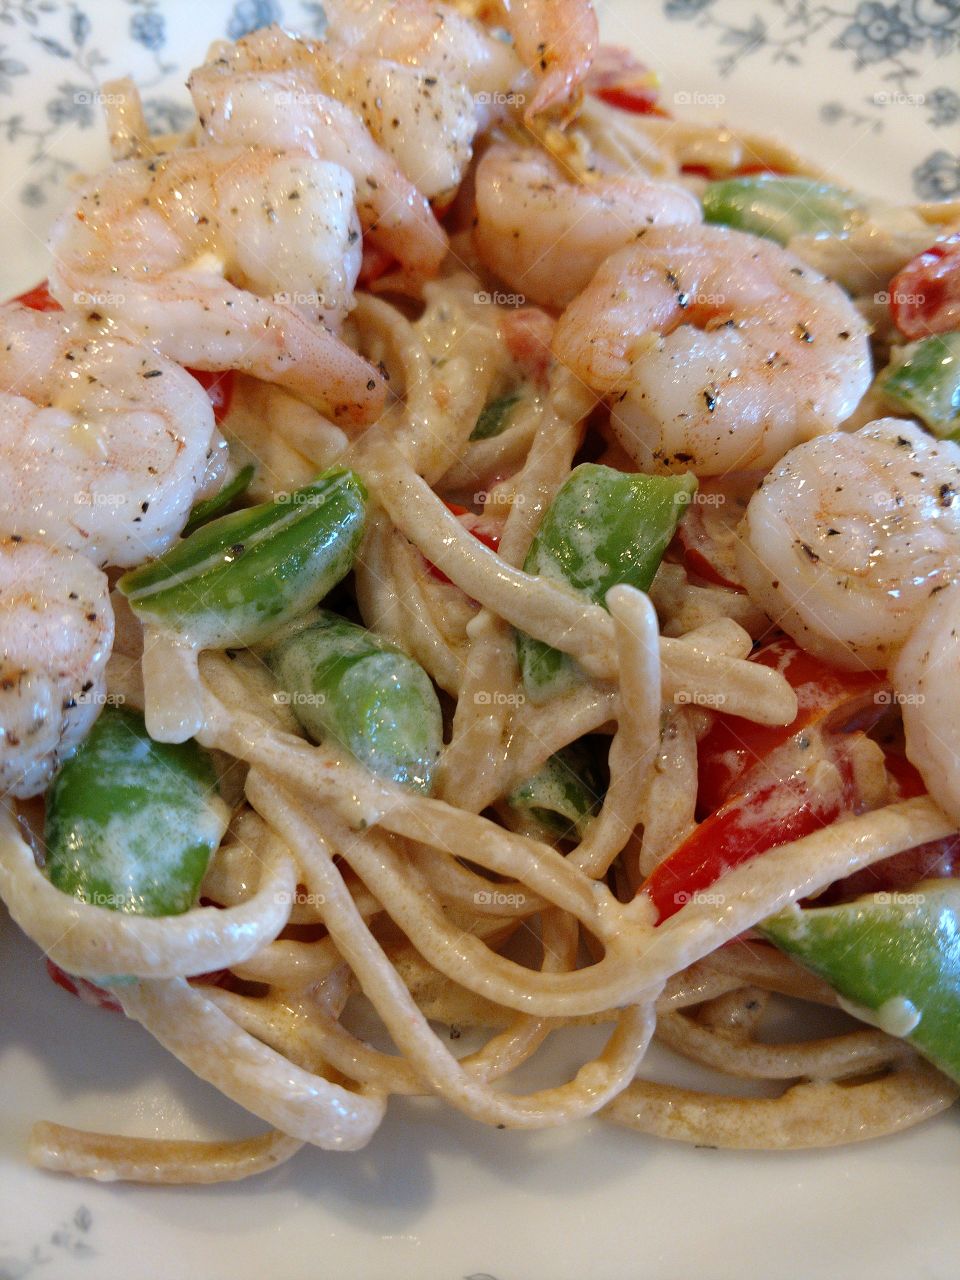 Extreme close-up of pasta and shrimp